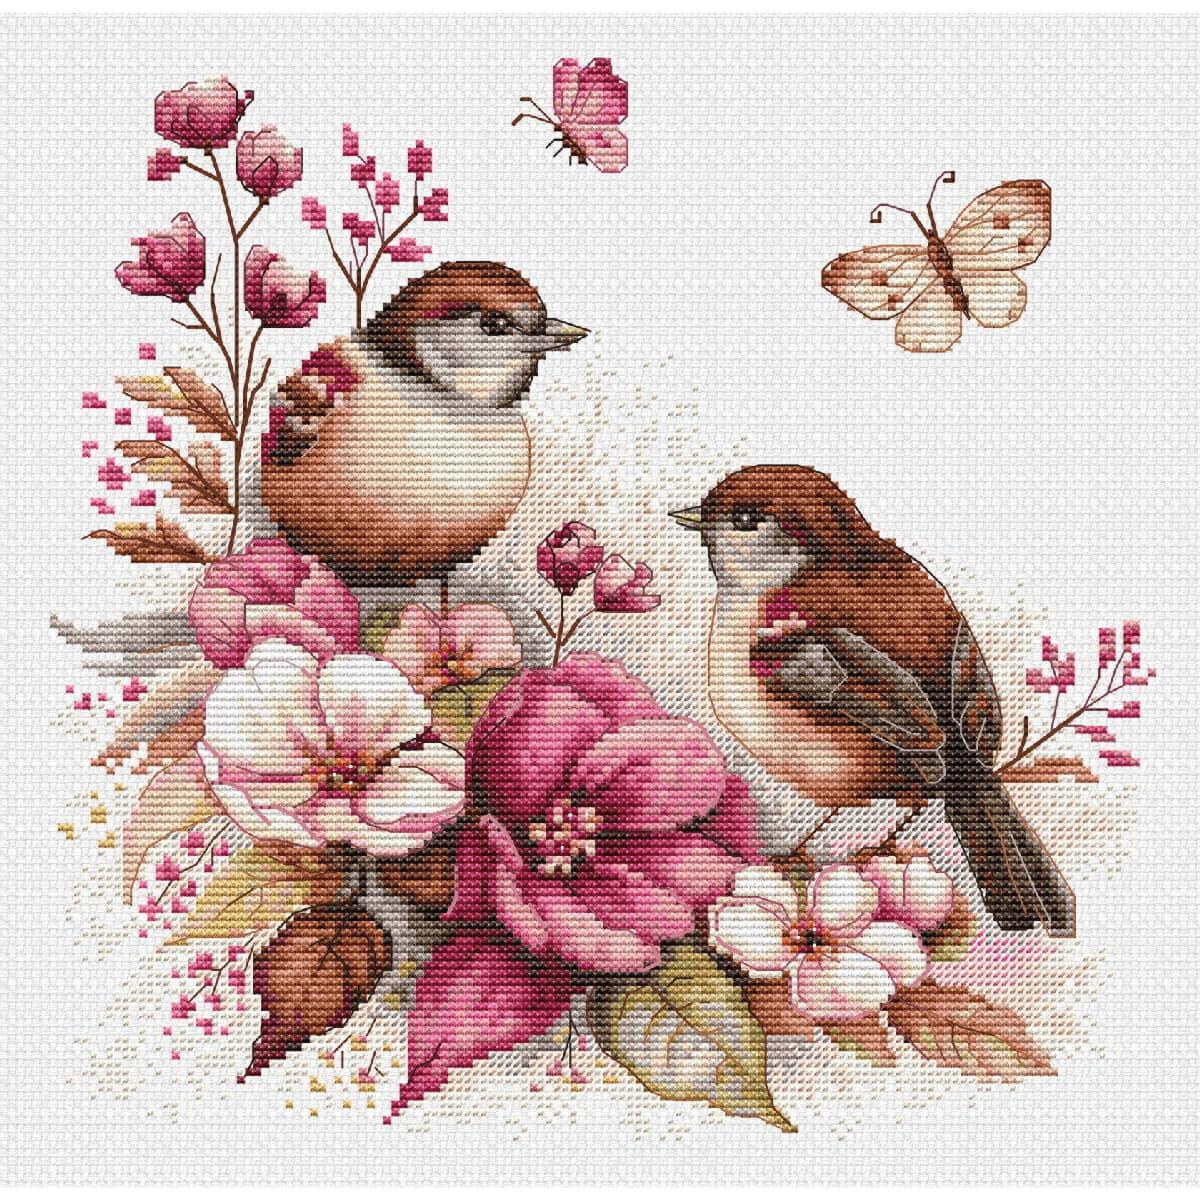 A delicate cross-stitch illustration shows two brown...